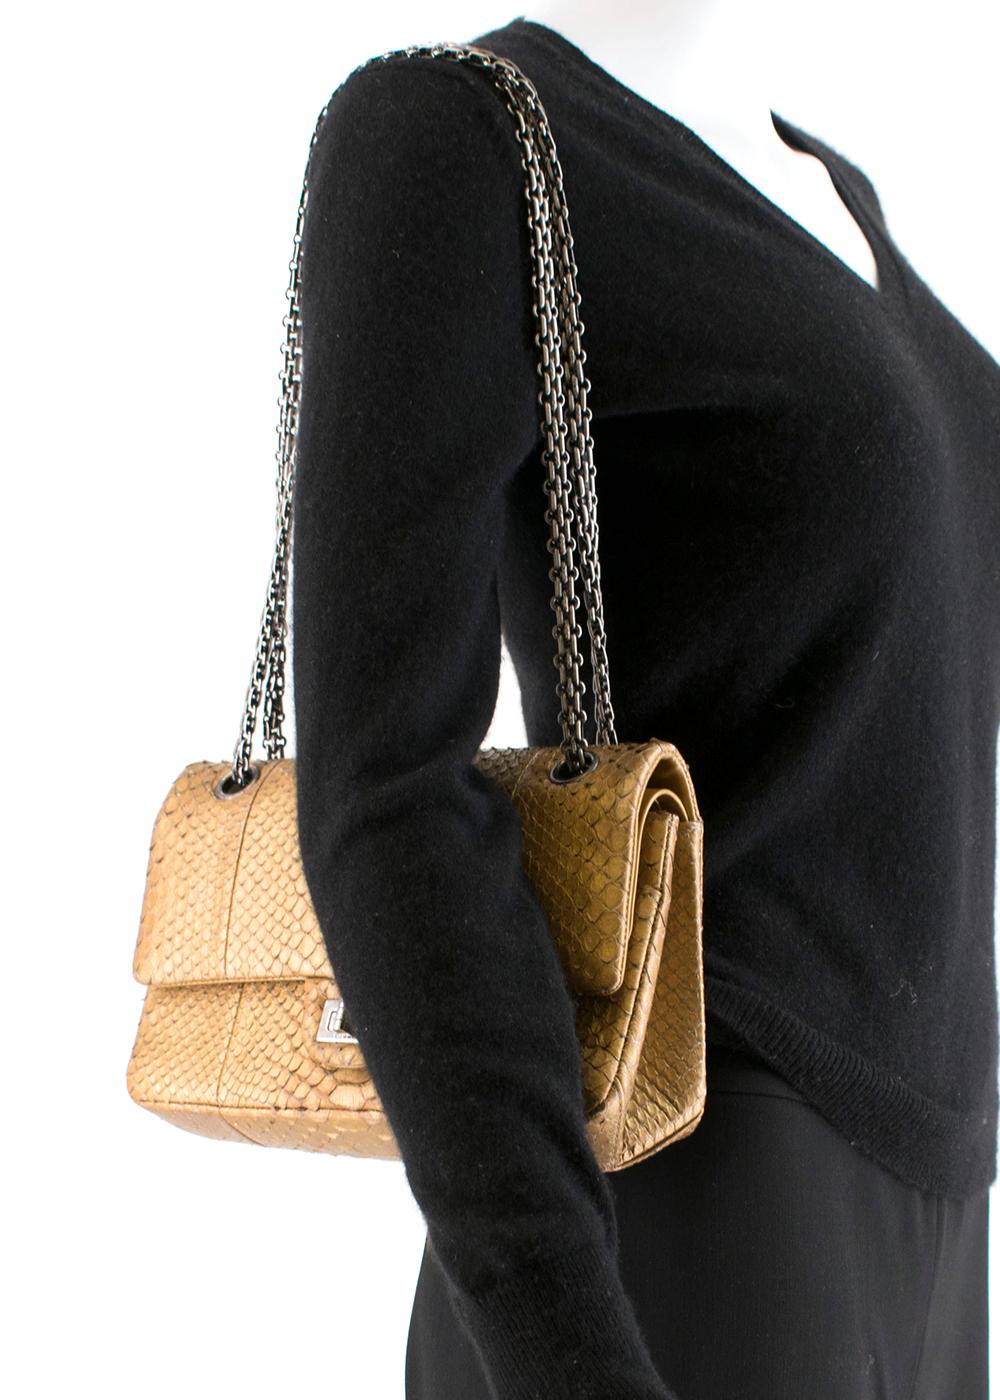 Chanel Reissue 225 Double Flap Bag in Matte Gold Python 1